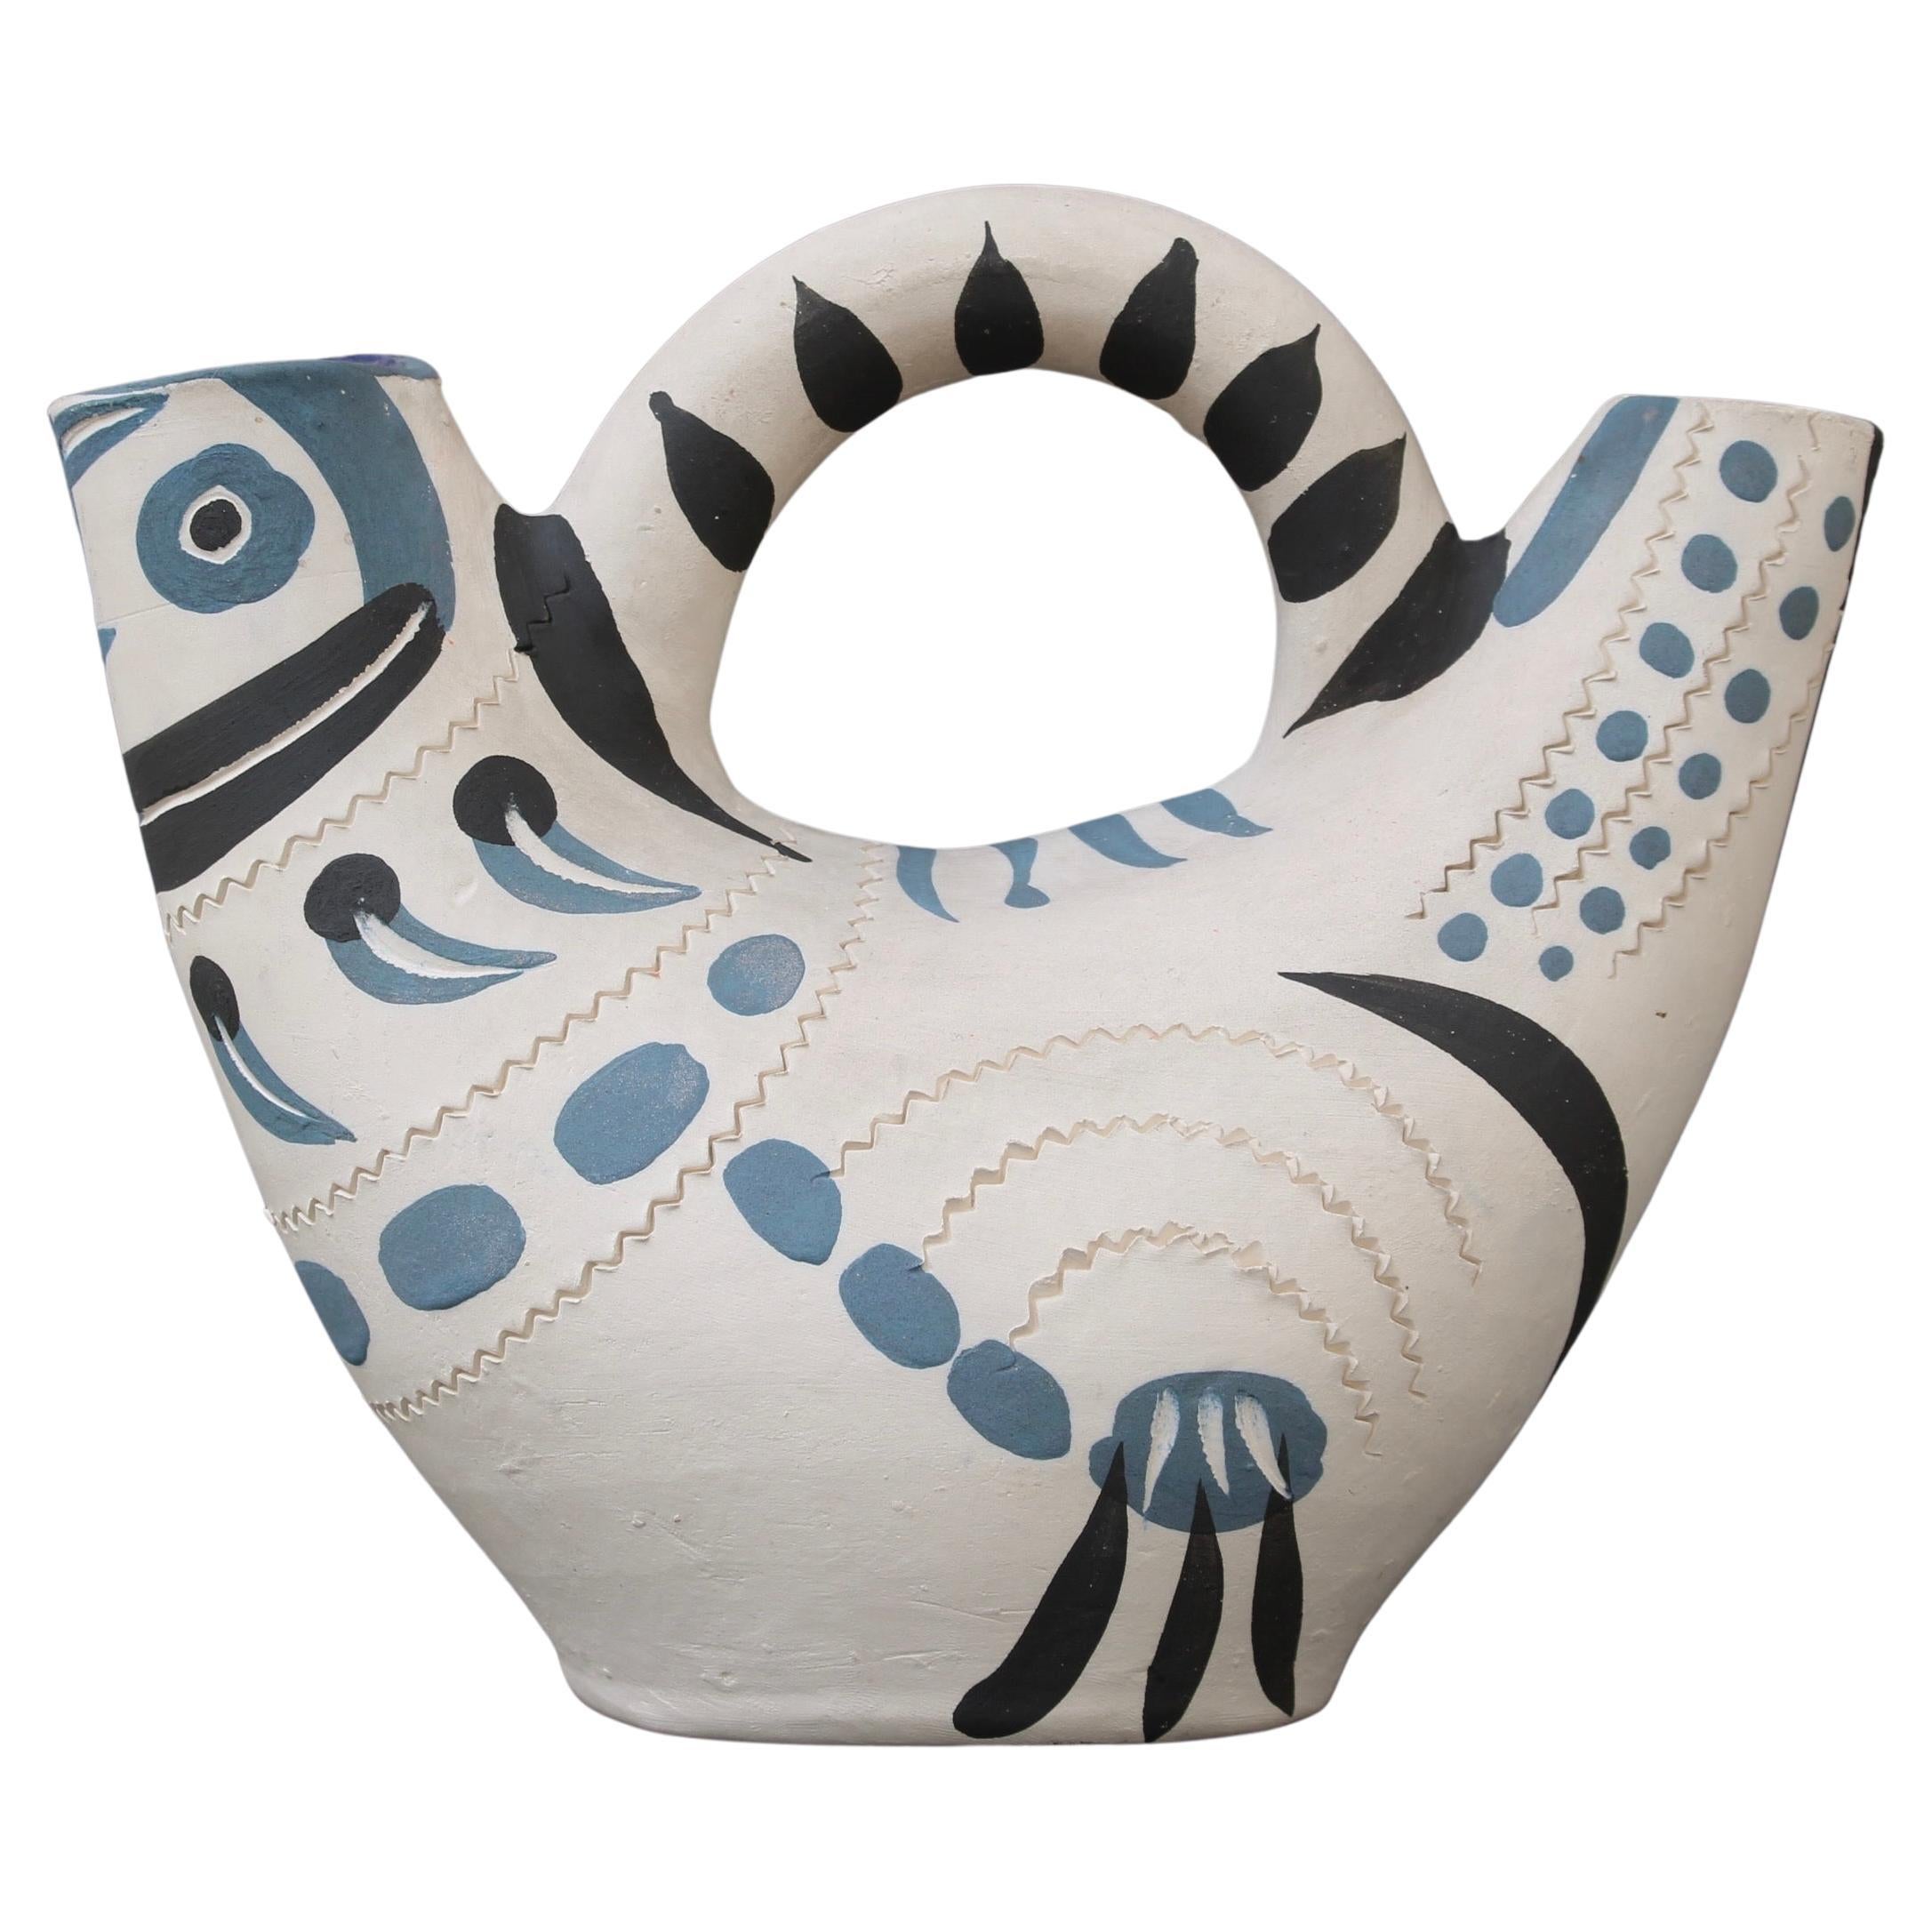 'Pichet Espagnol' from the Madoura Pottery 'AR 245' by Pablo Picasso '1954'